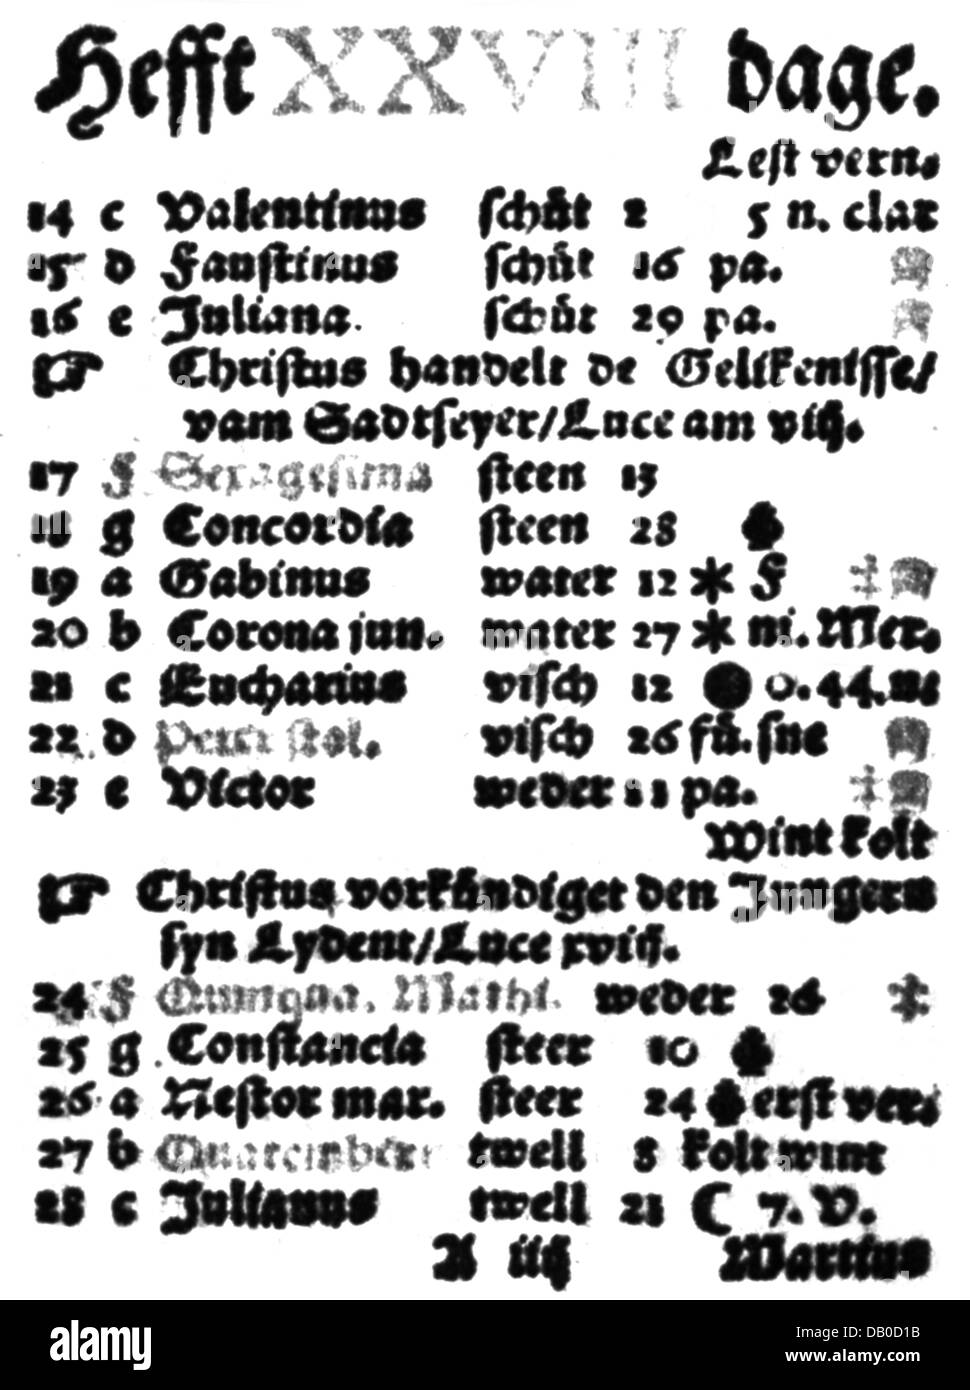 calendar, 14. - 28. Februar 1555, by H. de Verve, Magdeburg, Germany, 1555, day, days, Catholic saints, Julian calendar, month, months, 16th century, historic, historical, Additional-Rights-Clearences-Not Available Stock Photo